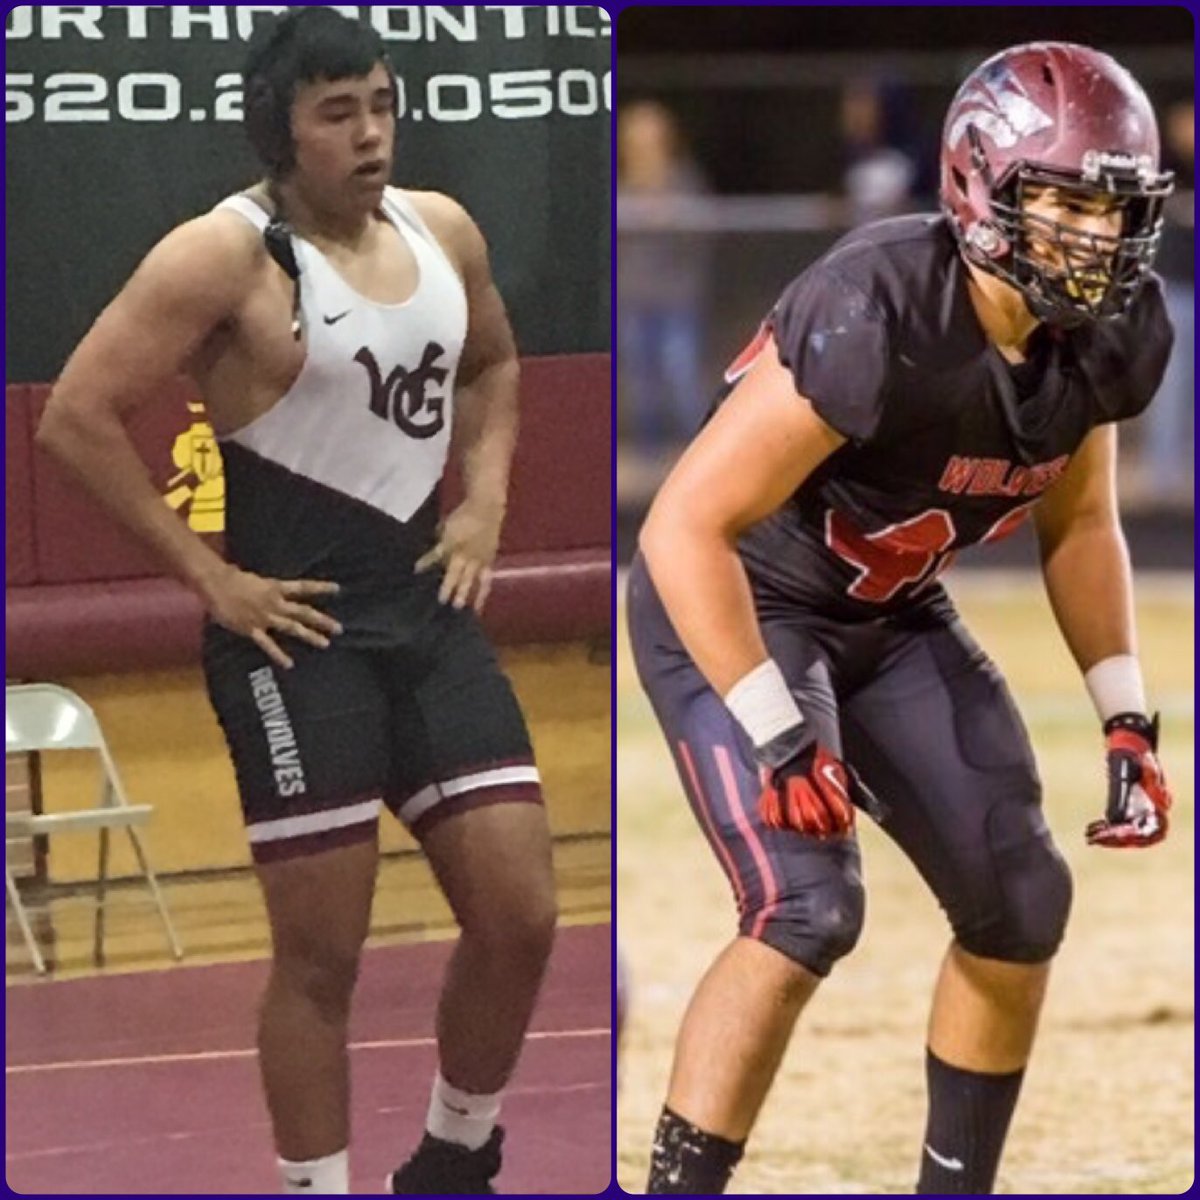 Freshman advice: He who walks with the wise will become wise, but the companion of fools will be destroyed‼️Proverbs13:20 #KeepGrinding @Grove_Wrestling @FB_RedWolves @WaldenGroveHS #SouthernArizonafootballmatters